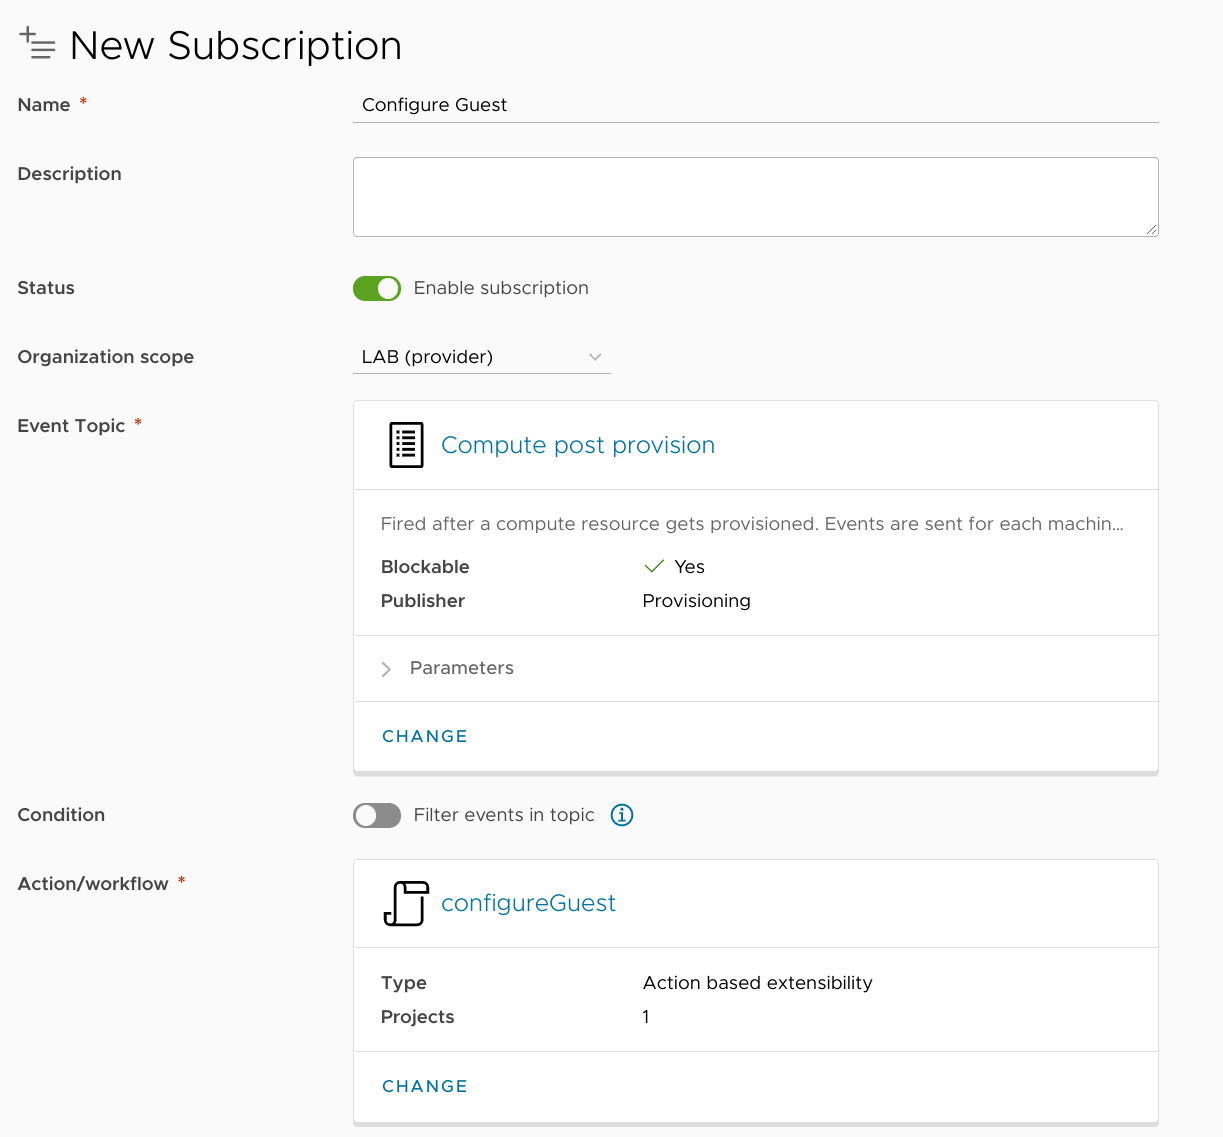 Creating the new subscription